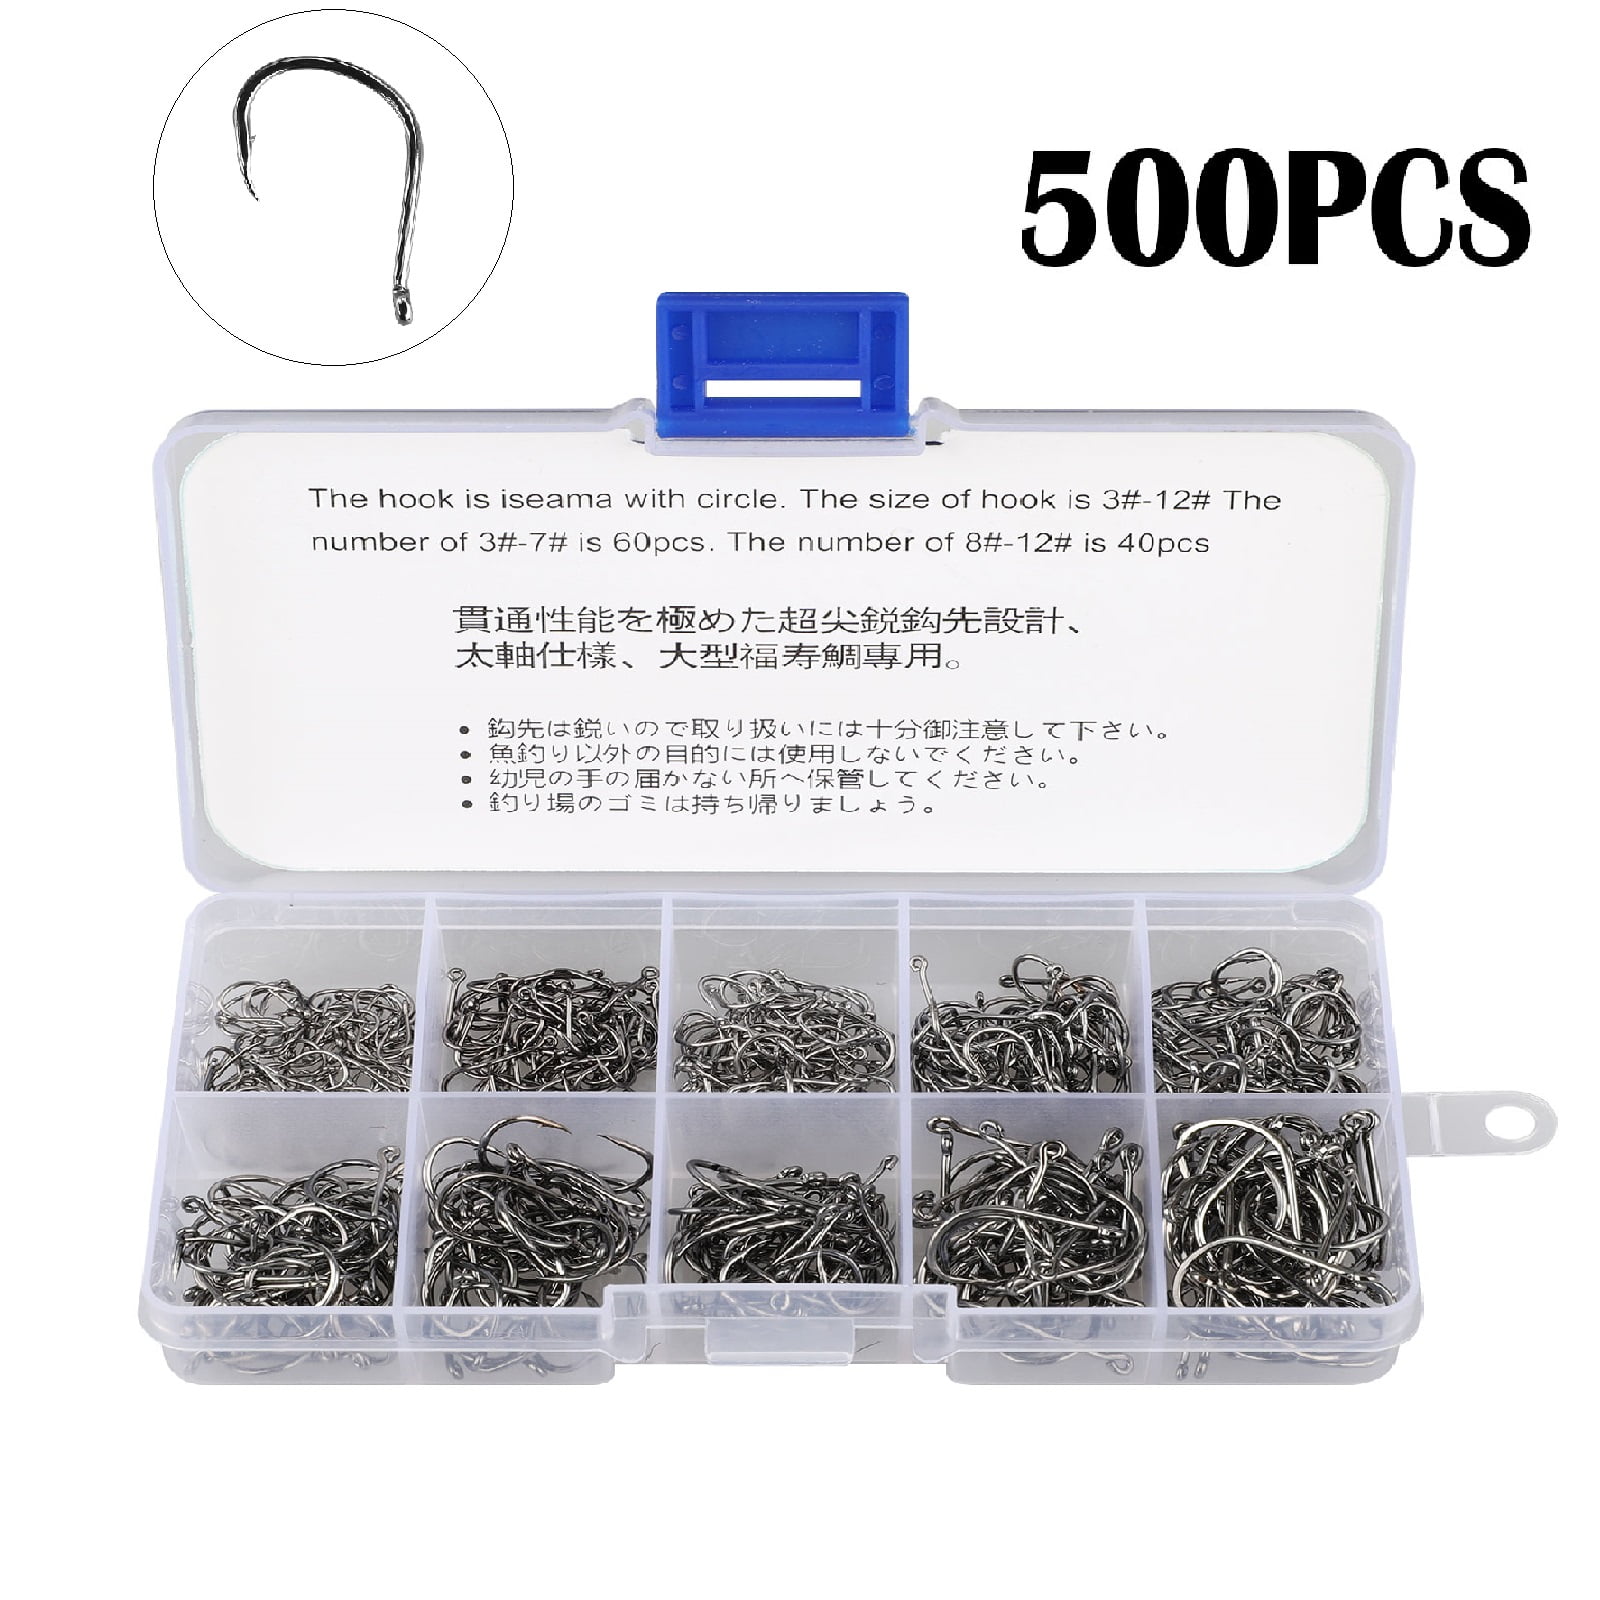 500pcs 10 Sizes Assorted Sharpened Fishing Hooks Lures Baits With Tackle